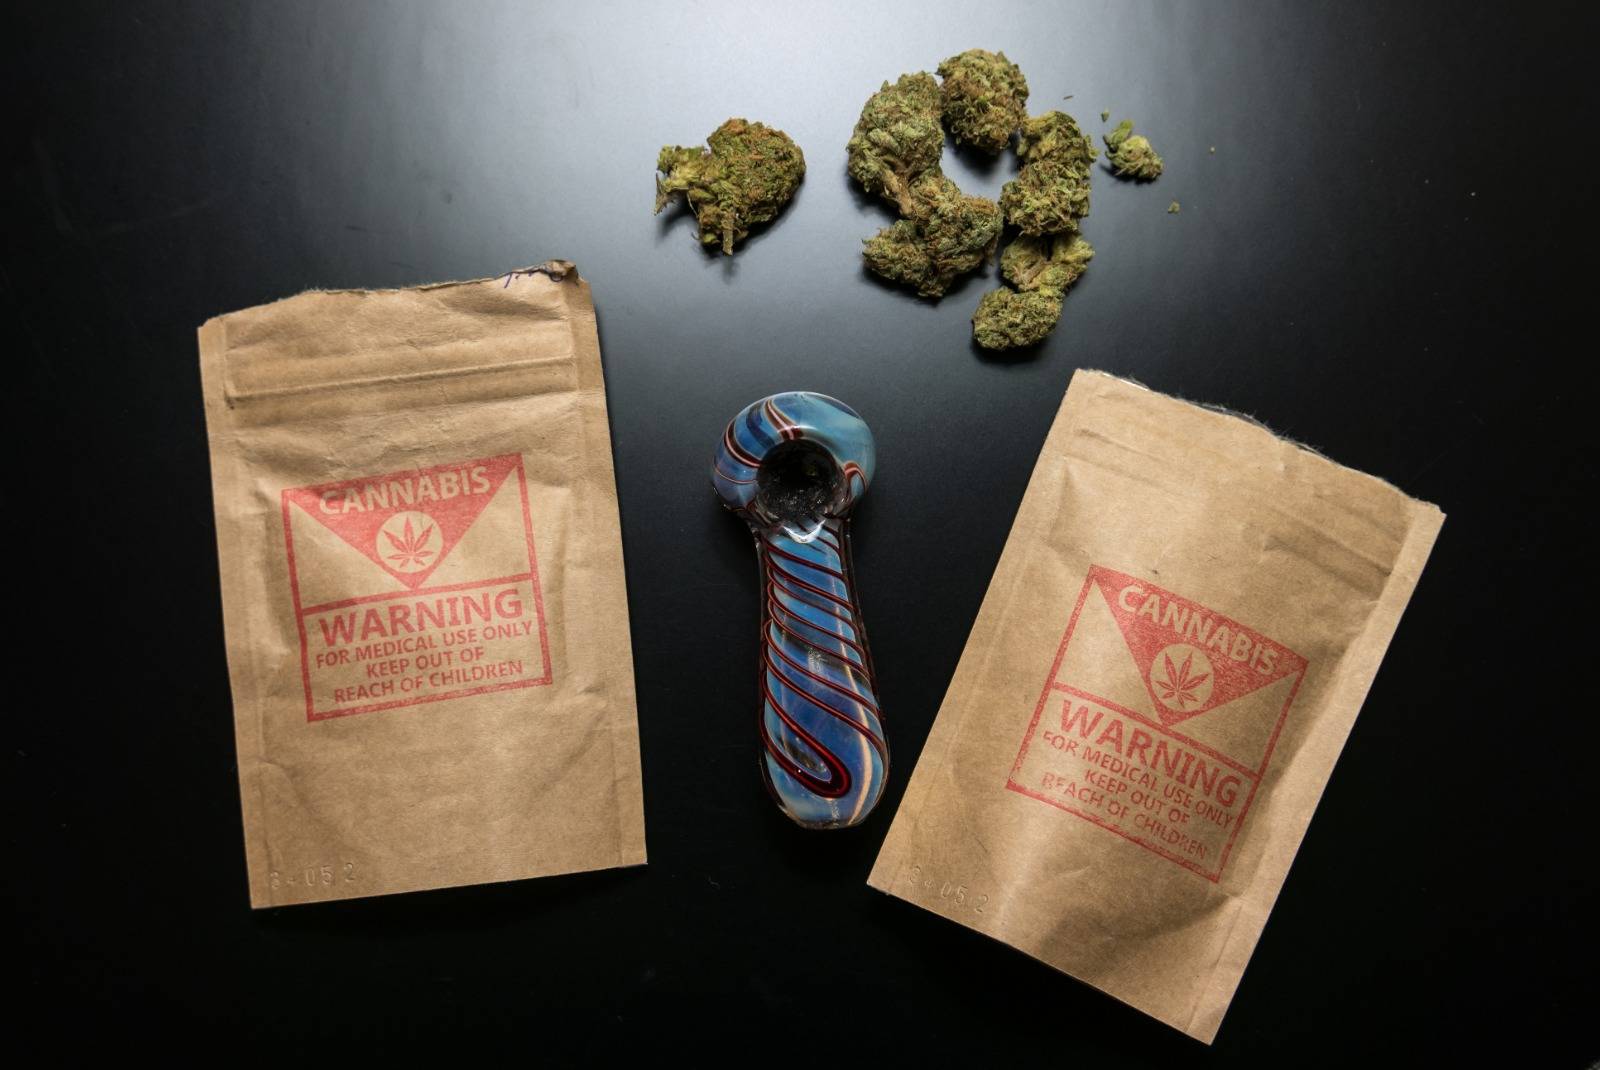 Legal Cannabis Packages and Pipe as discounts on weed discord servers. Speed Greens